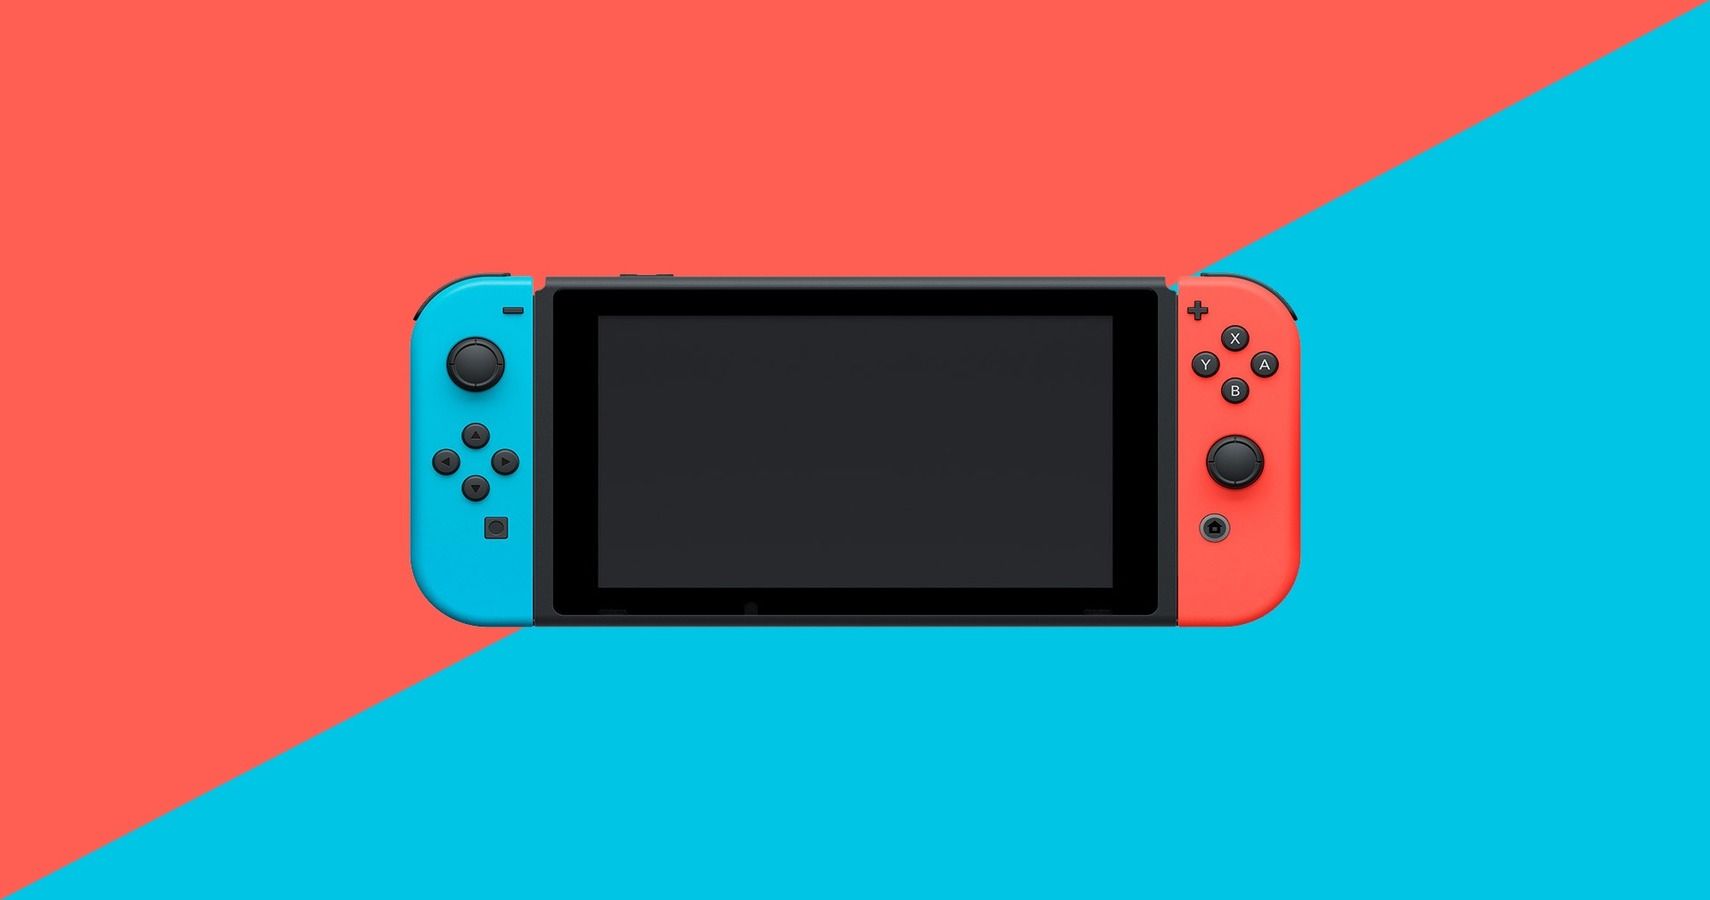 10 Best Indie Games For Nintendo Switch (January 2019)